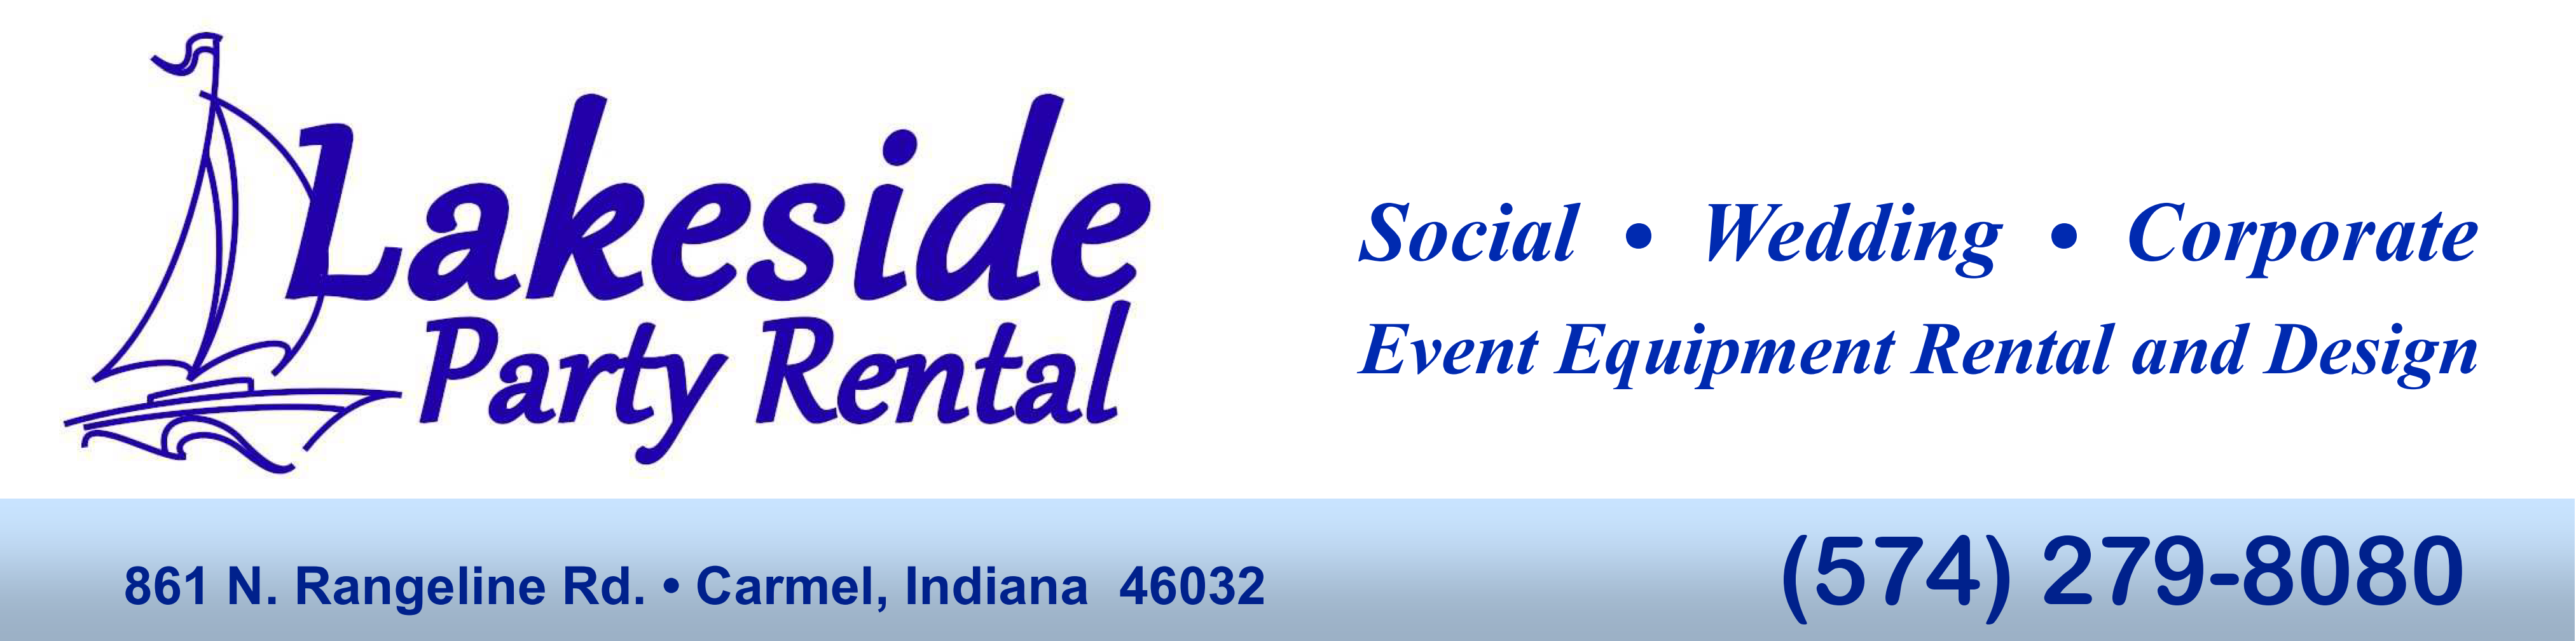 Party Rental Equipment from Lakeside party rental serving North Central Indiana.